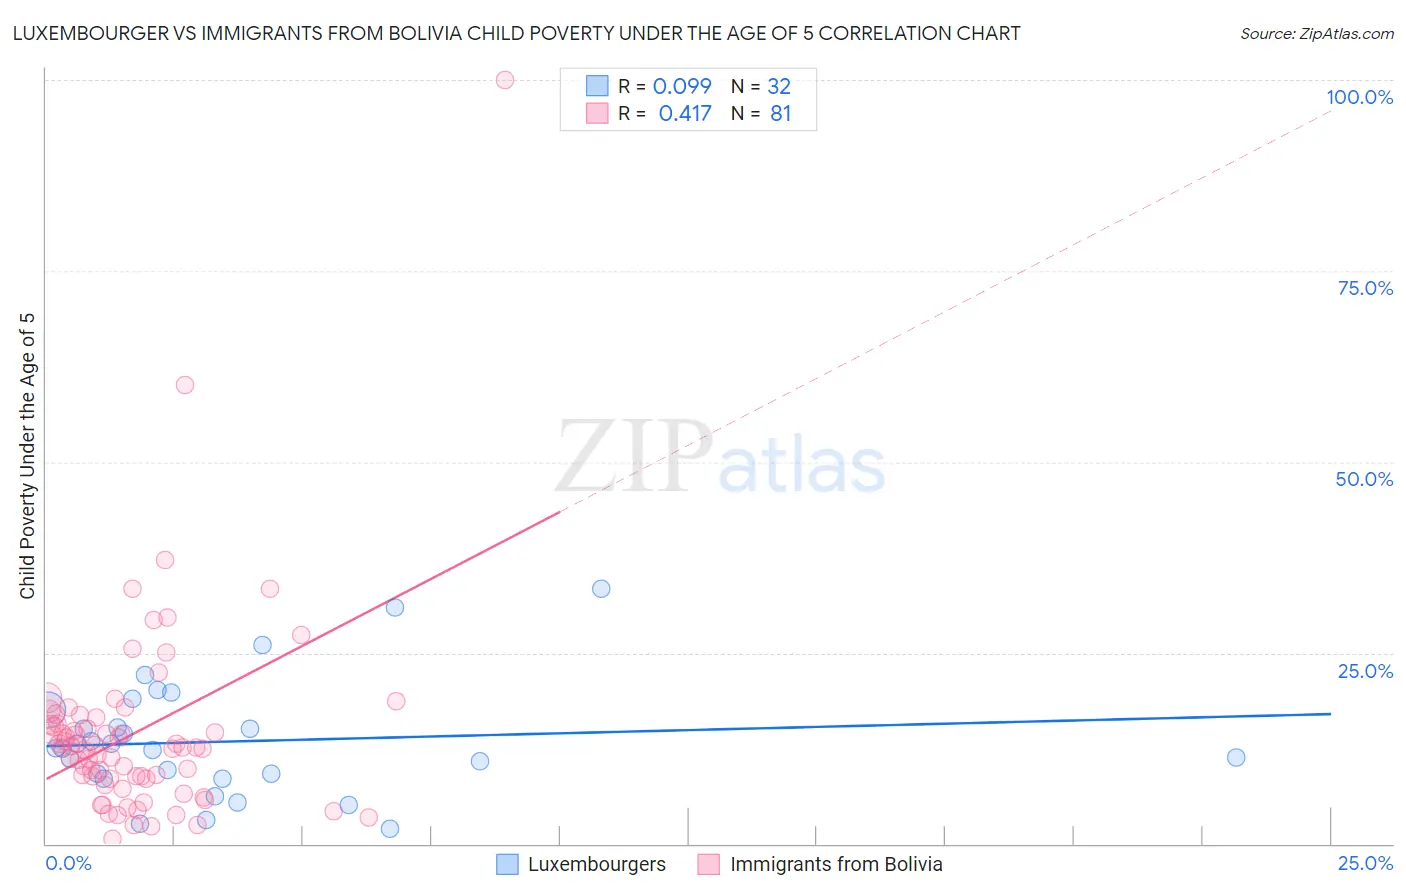 Luxembourger vs Immigrants from Bolivia Child Poverty Under the Age of 5